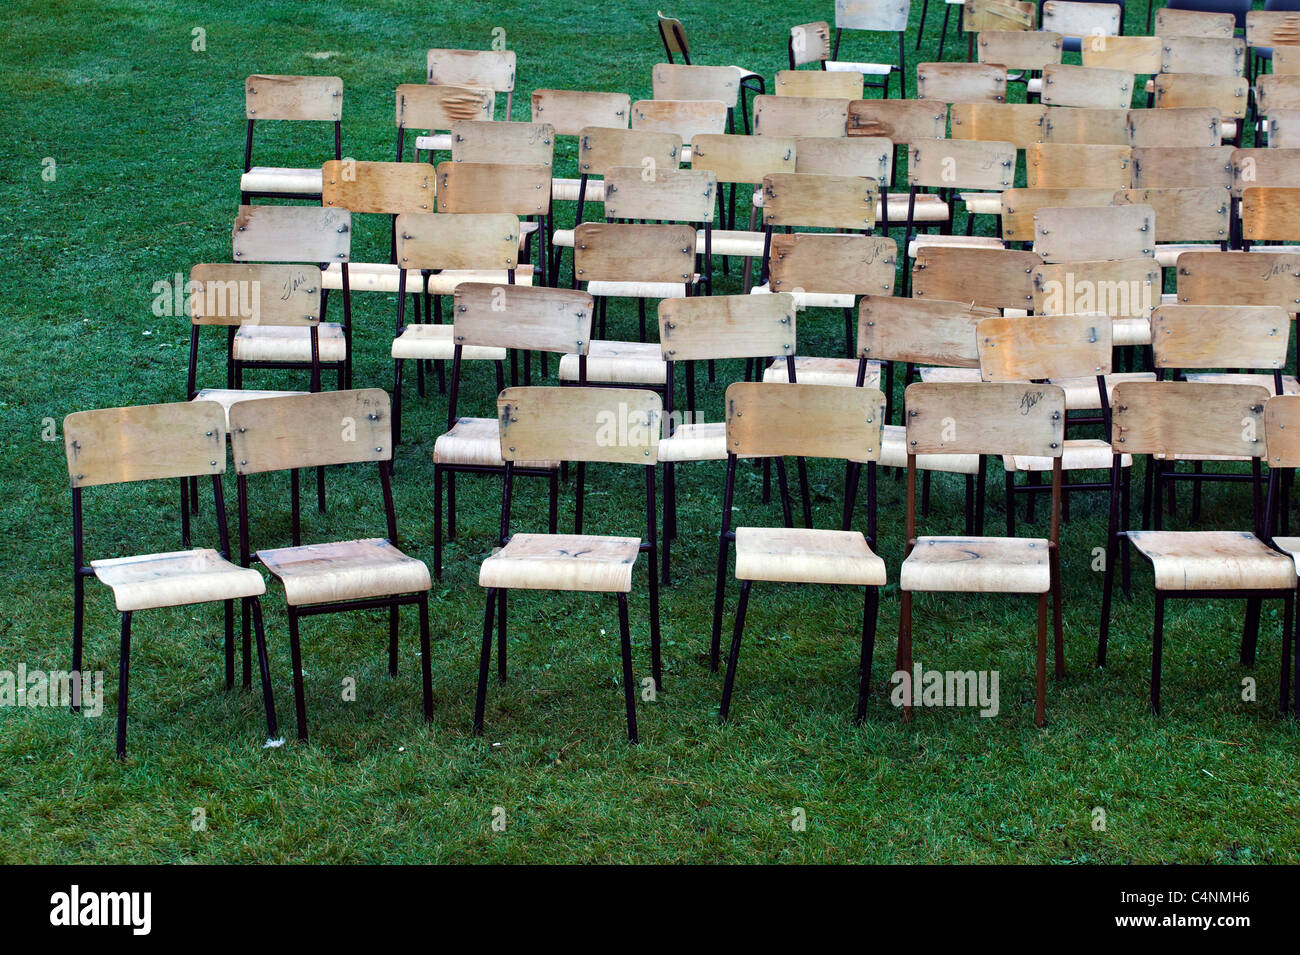 Wooden chairs arranged for outdoor concert Stock Photo